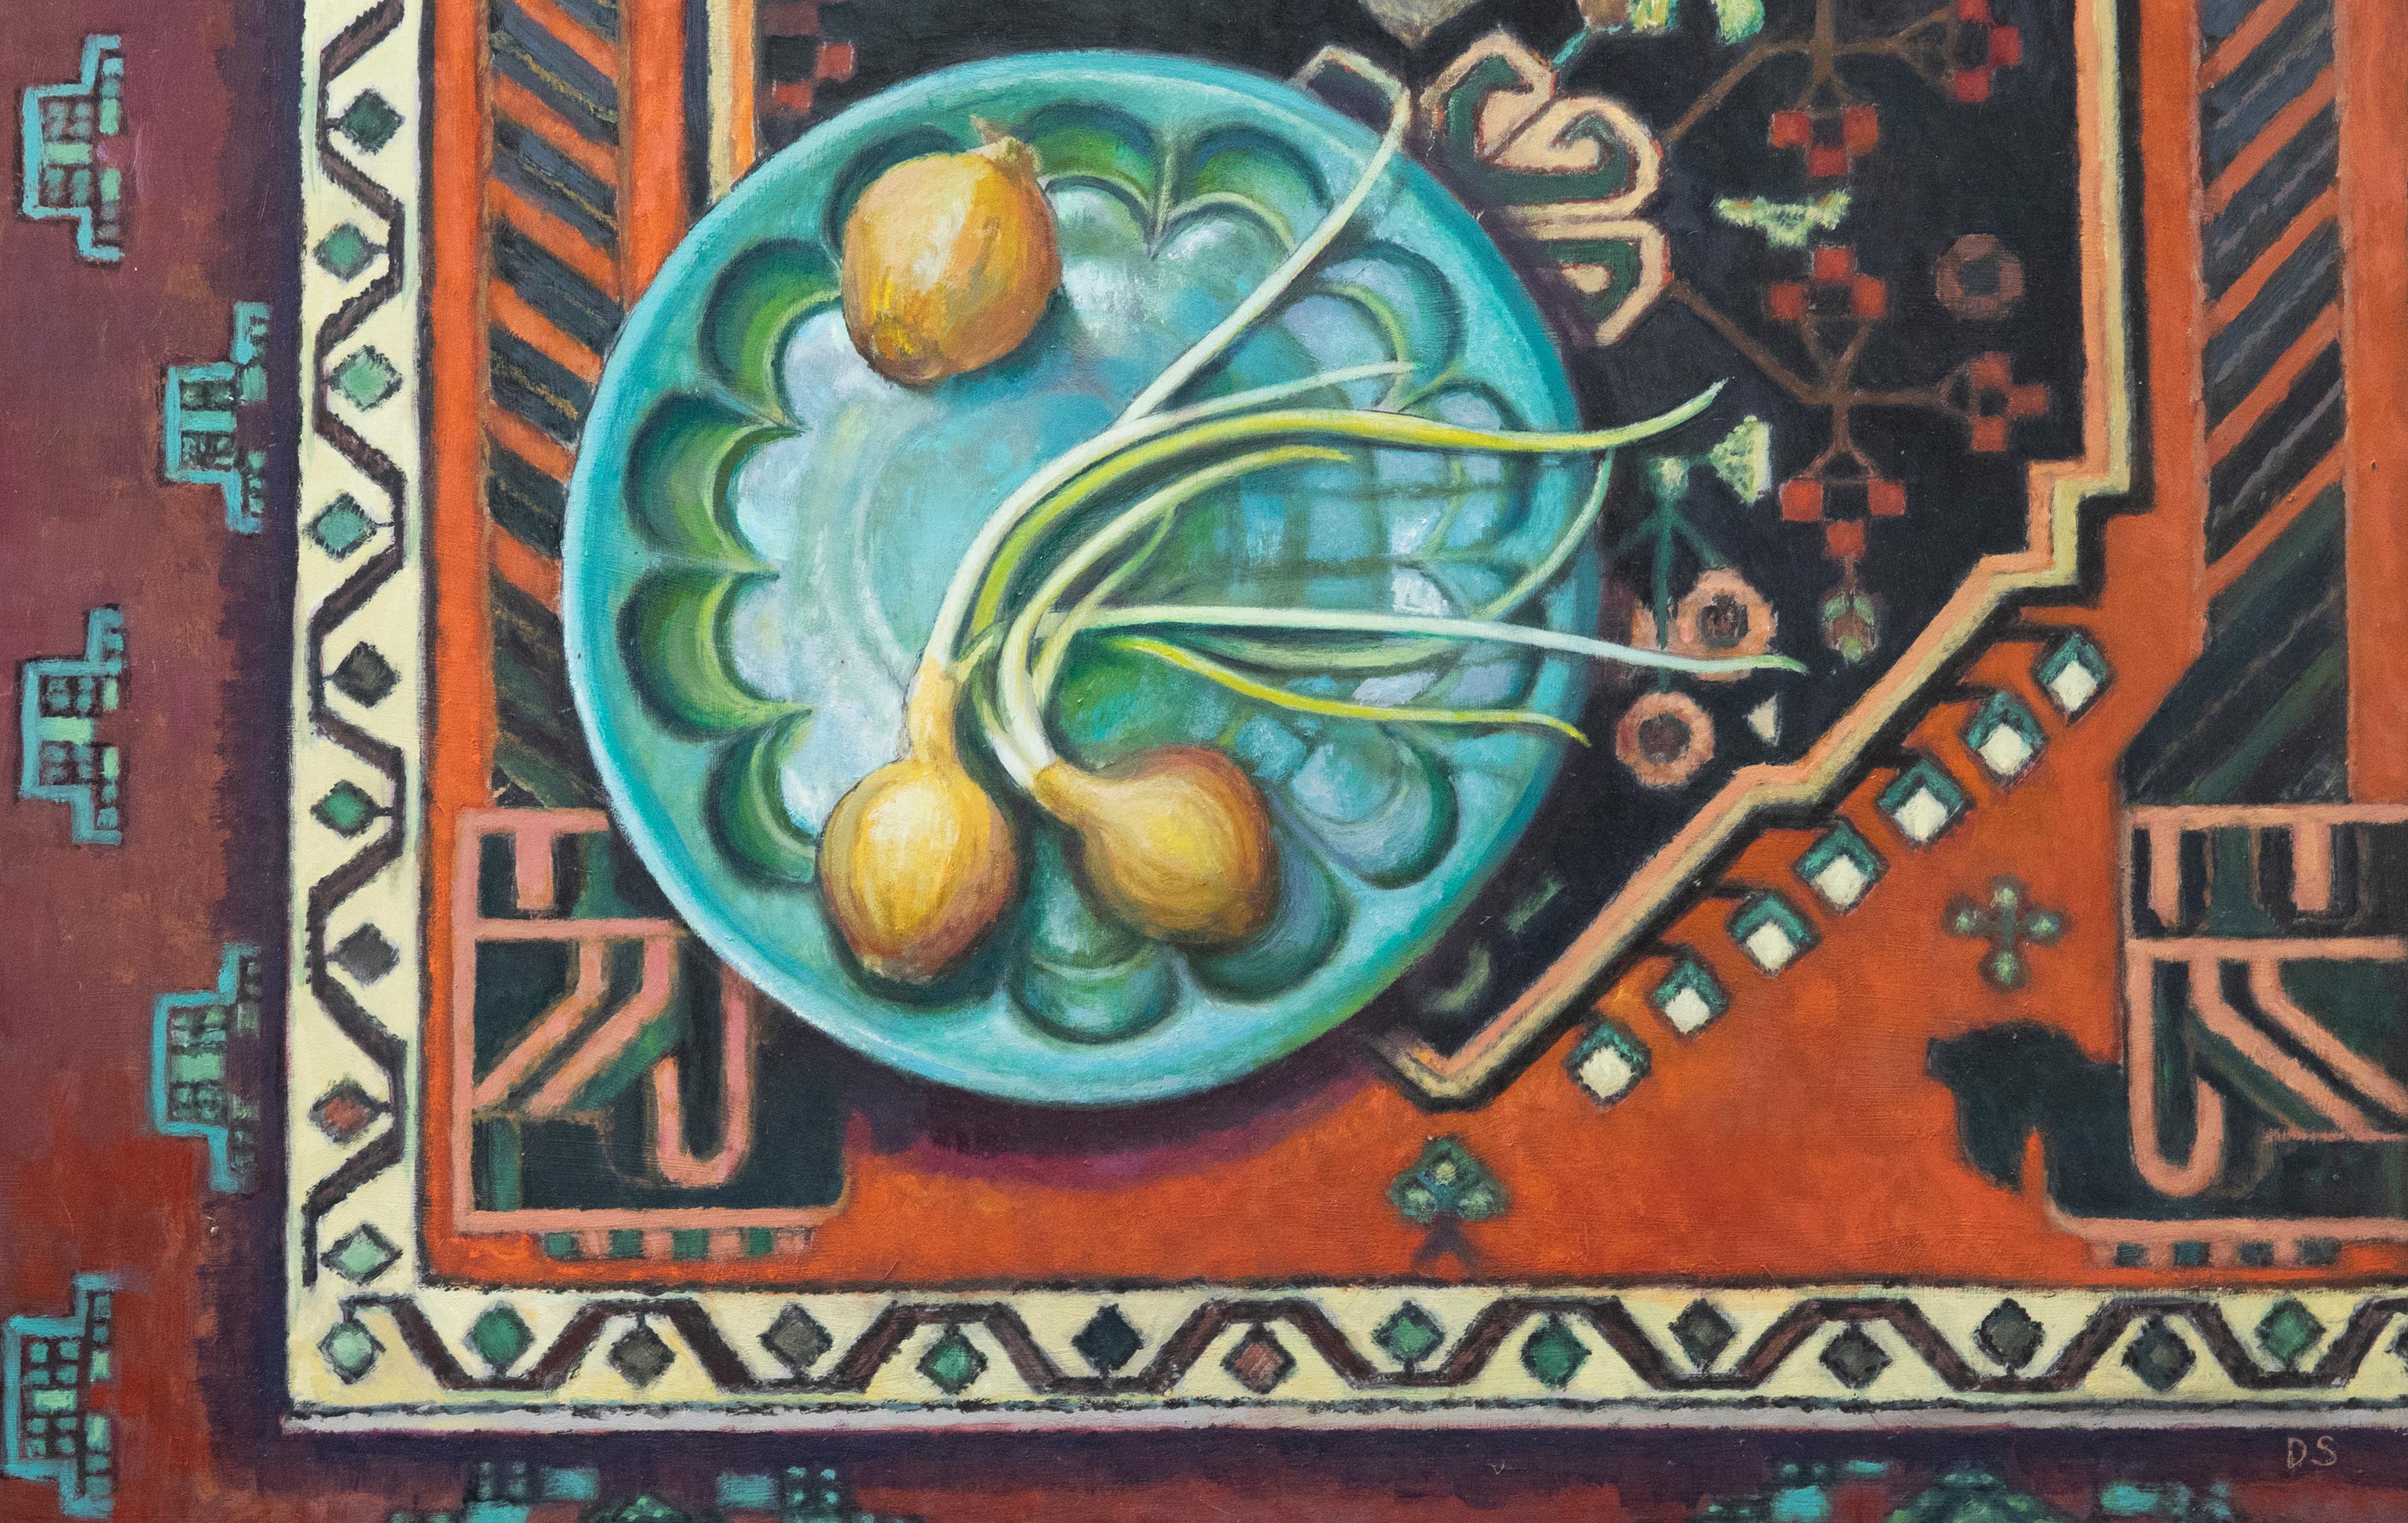 This accomplished still life study by Dorothy Southern depicts onions in a fluted turquoise bowl places on a large patterned kilim rug. The scene appears to take inspiration from the Bloomsbury group with a strong focus on colour, pattern and form.